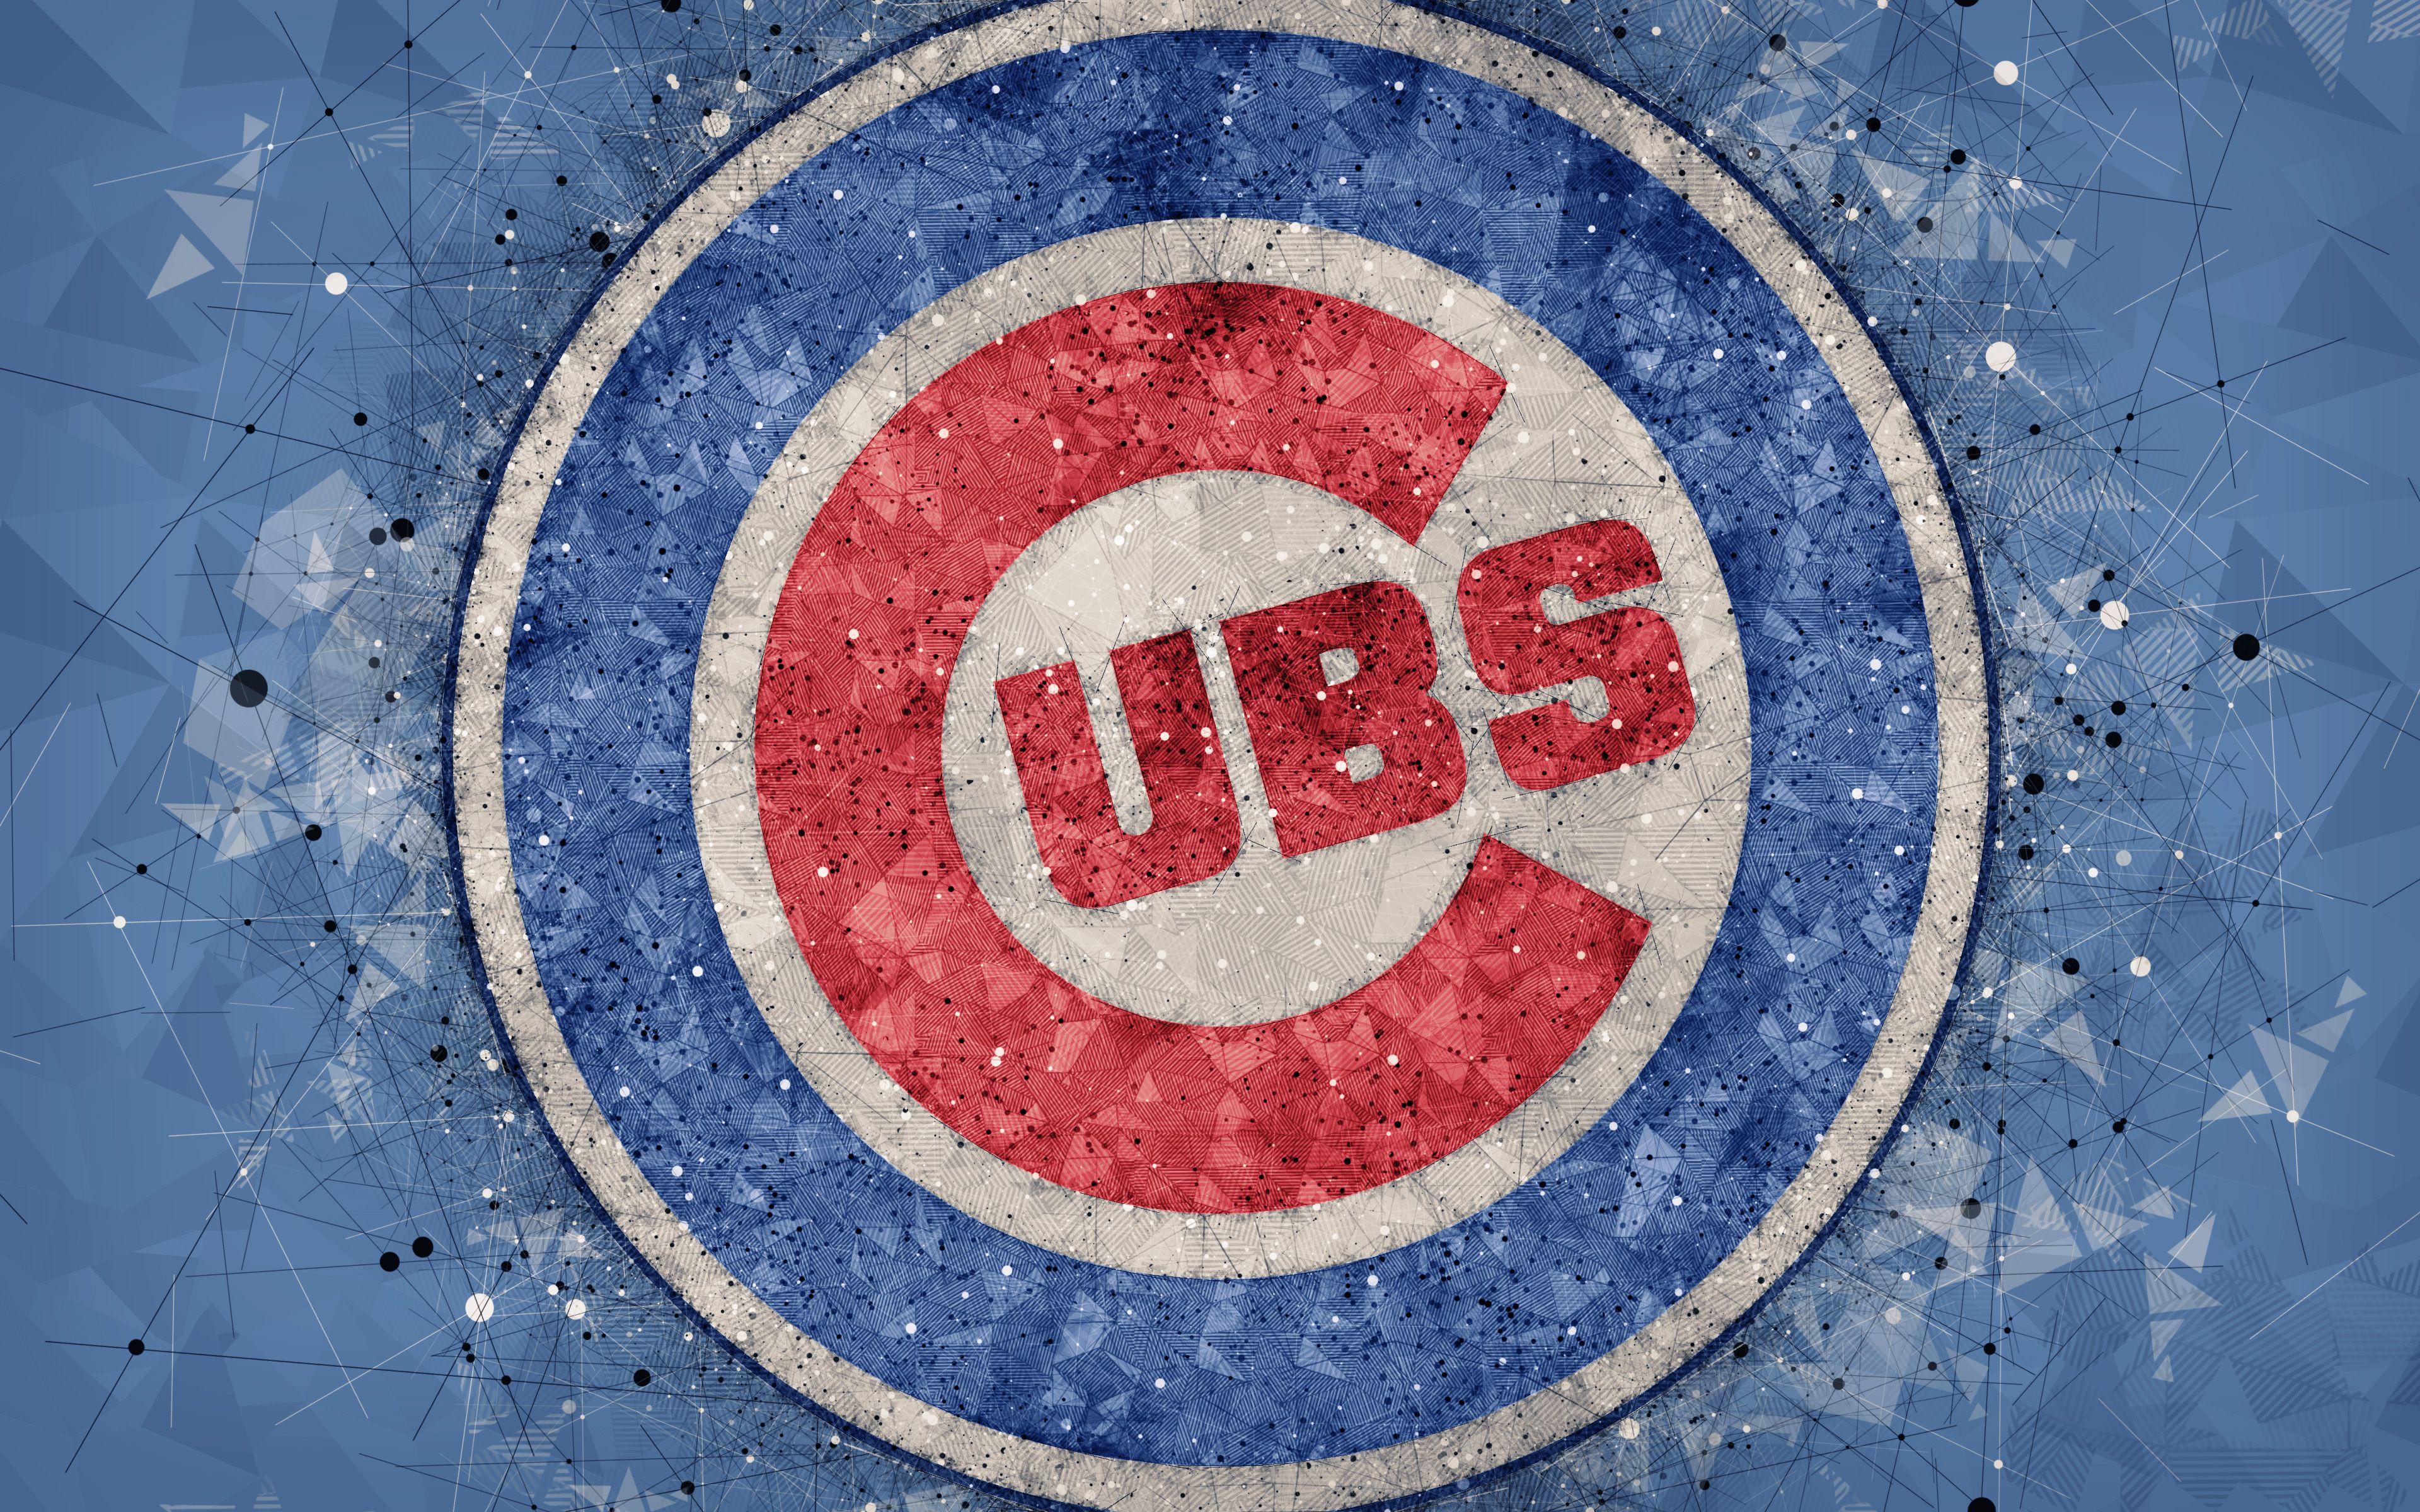 66+ Chicago Cubs Screensavers and Wallpaper